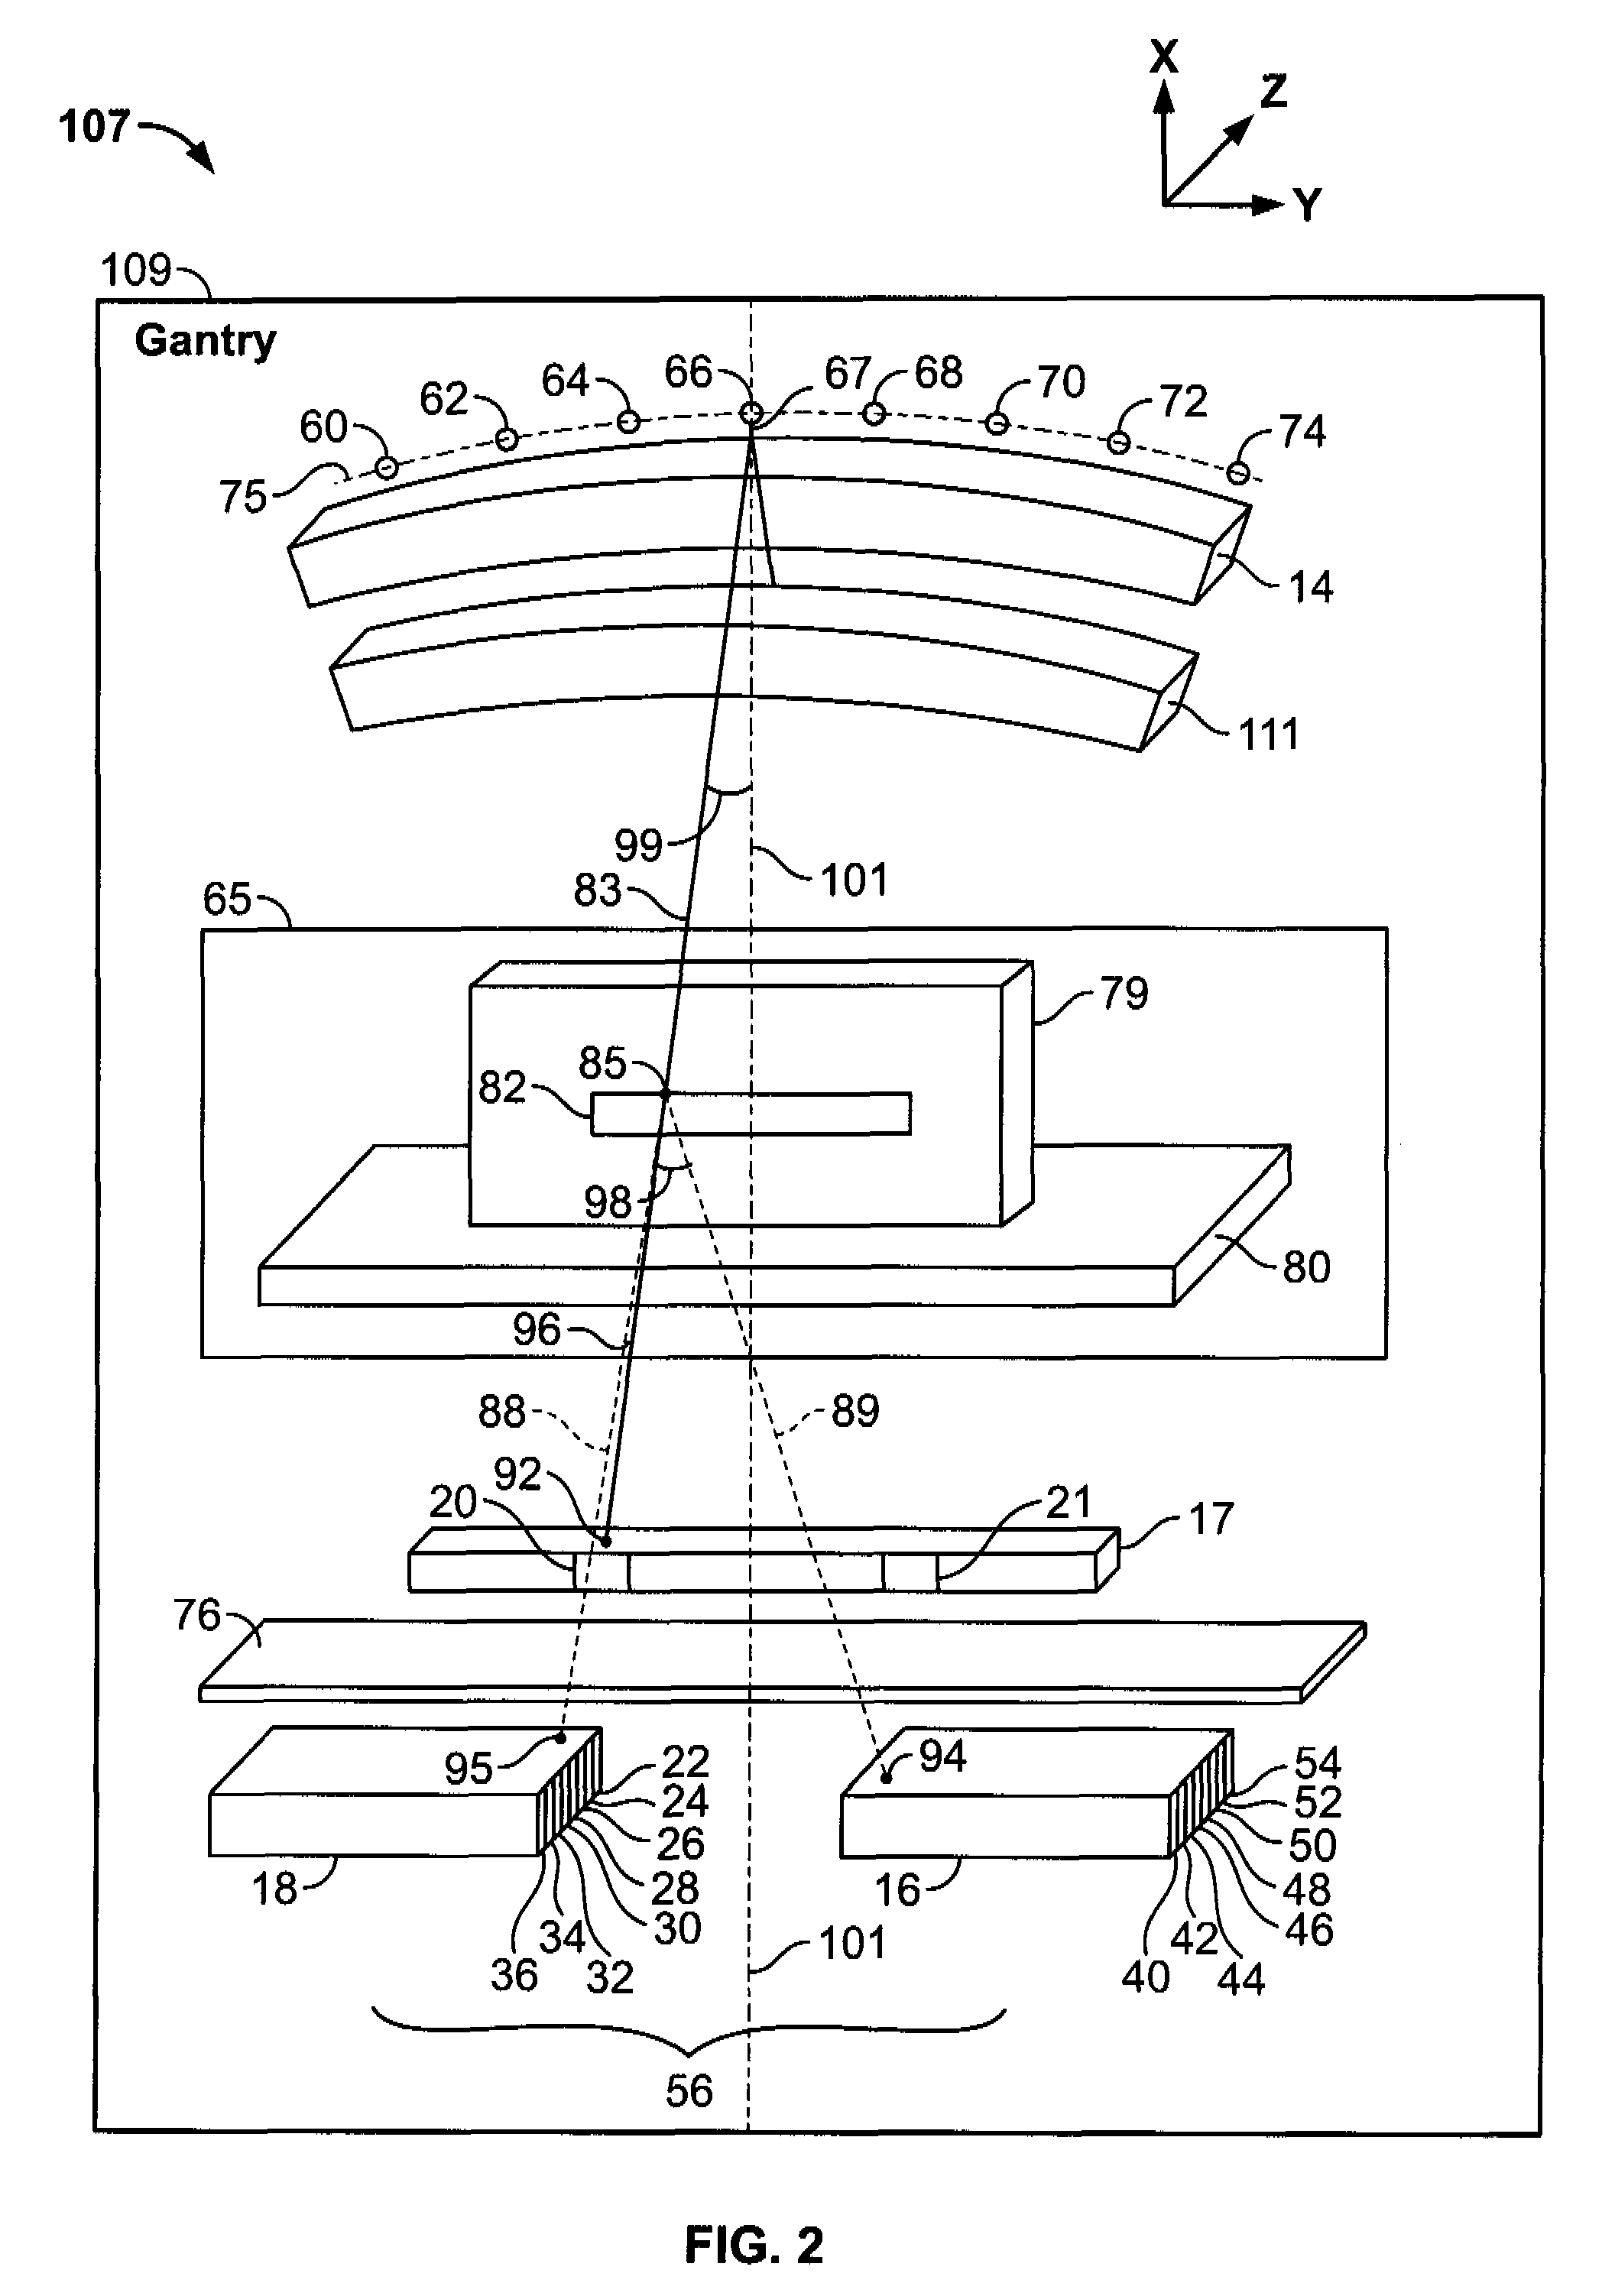 Systems and methods for identifying a substance